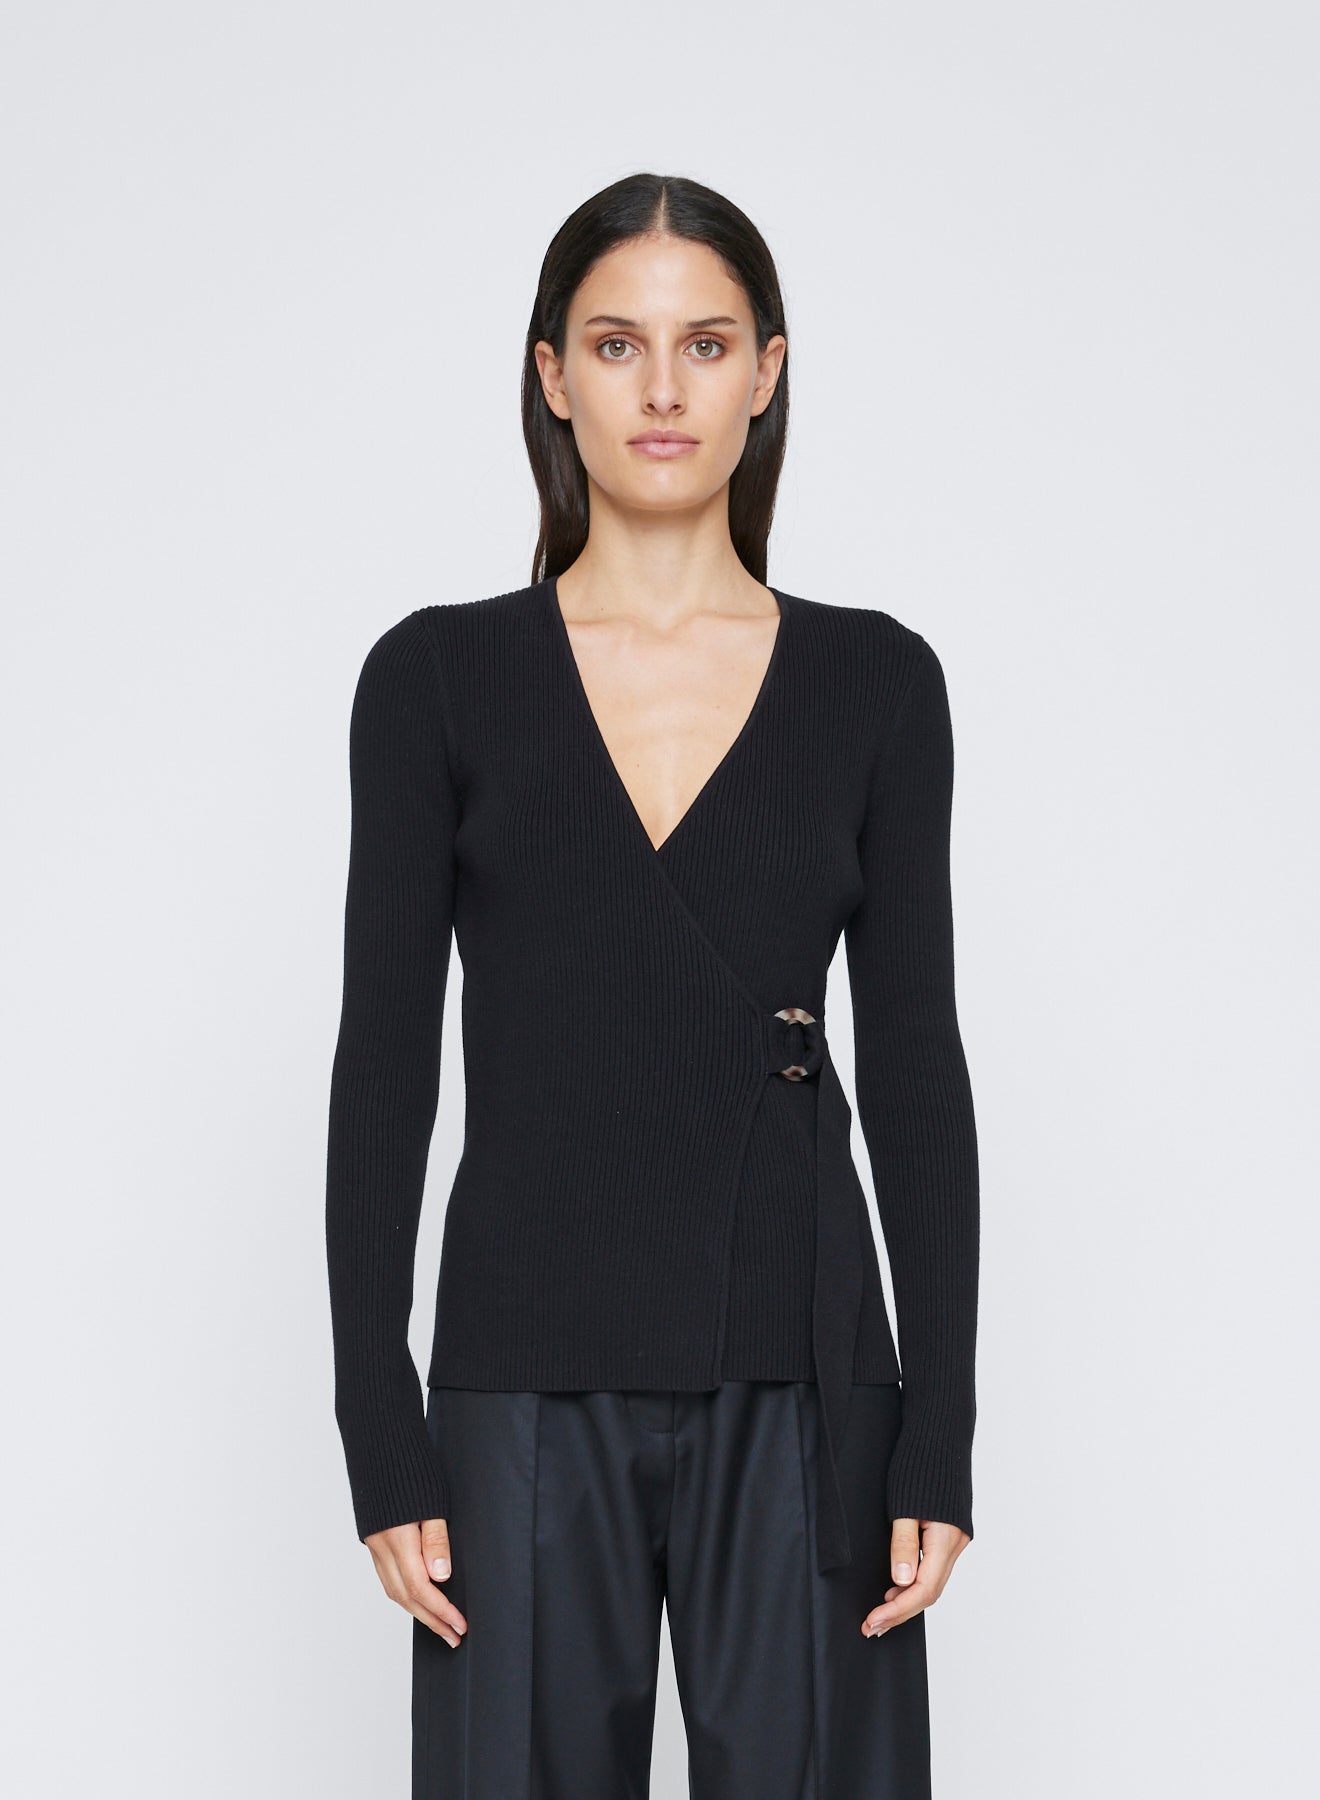 The Anna Quan Bonnie Top in Raven is a classic long sleeve knitted top with a belt closure and deep v cut neckline.